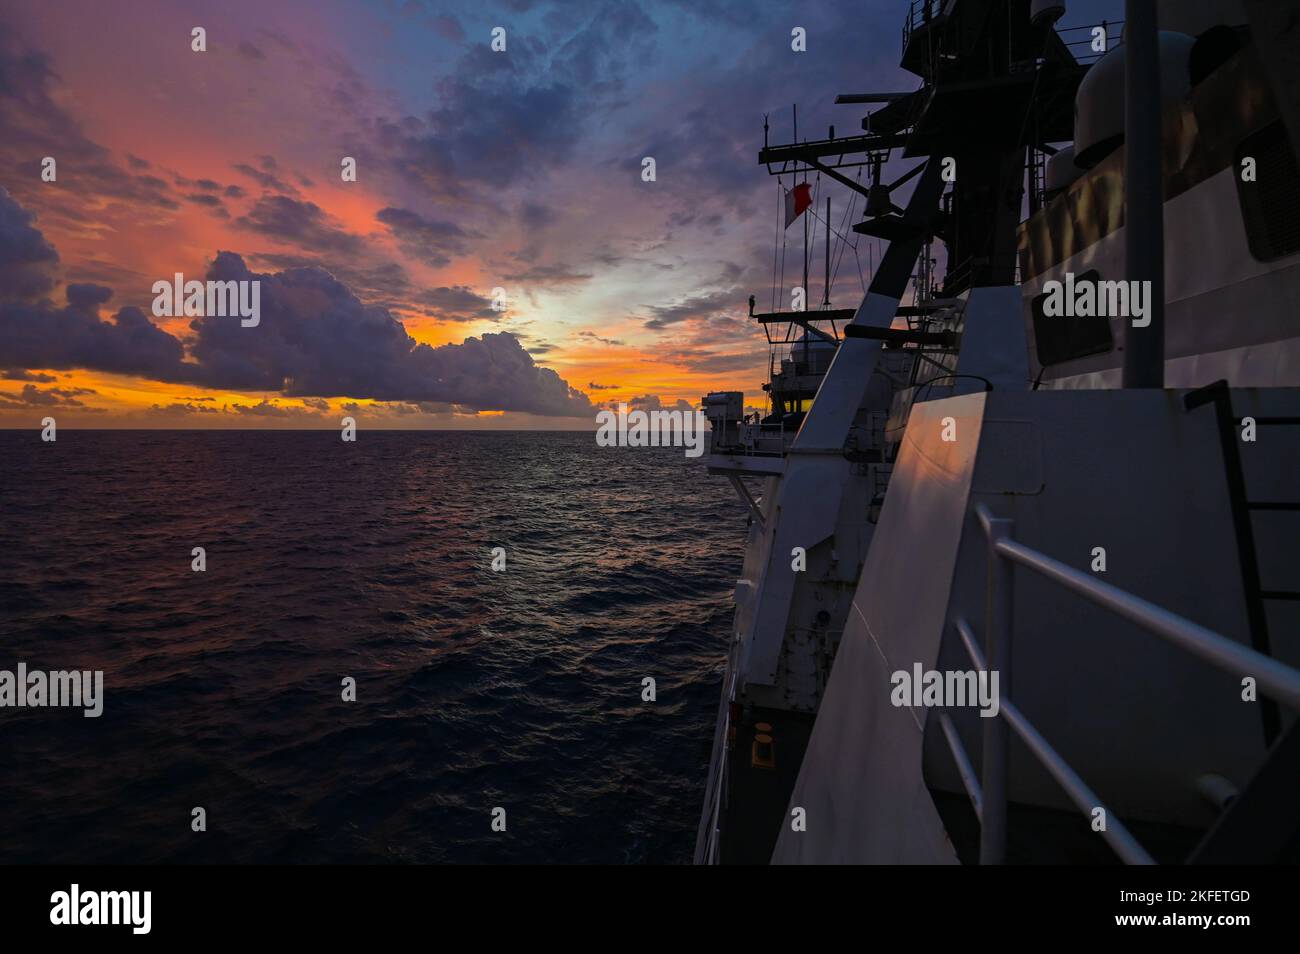 U.S. Coast Guard Cutter Midgett (WMSL 757) transits the Indian Ocean around sunset on Sep. 13, 2022. The crew of the cutter are under the tactical control of Commander, U.S. 7th Fleet. Stock Photo